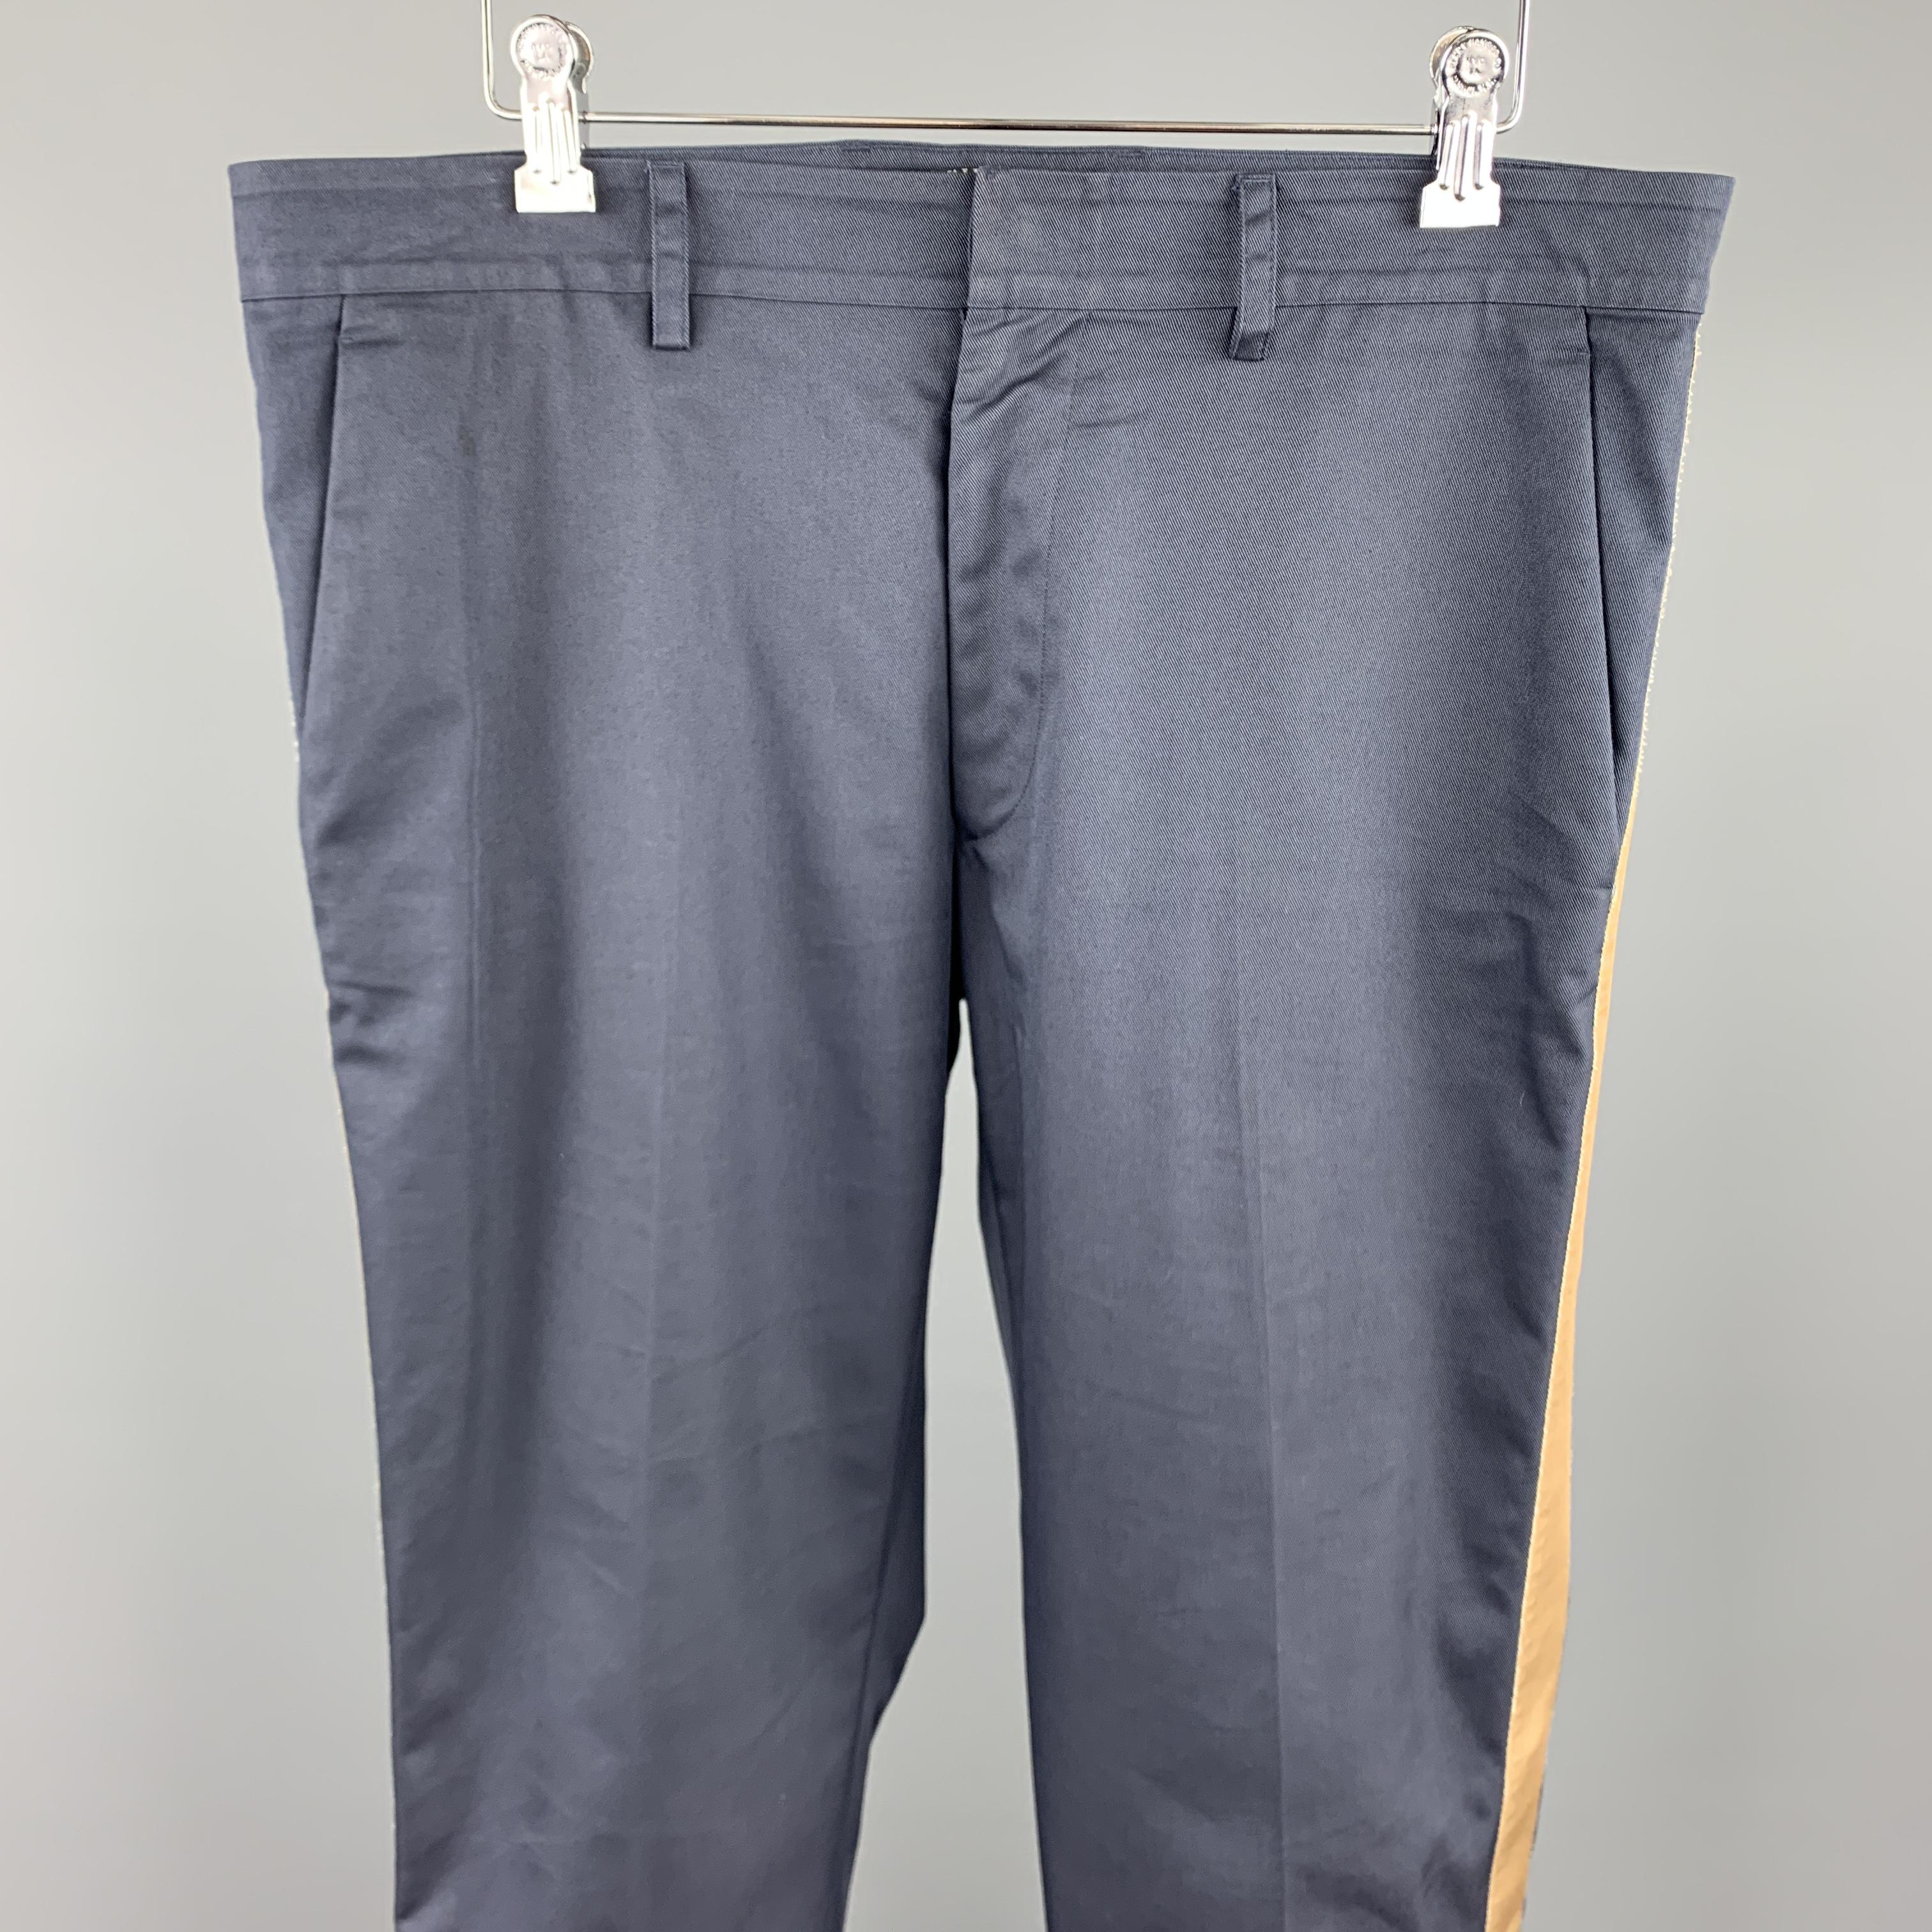 VALENTINO casual pants comes in a navy cotton / polyamide featuring a slim fit, folded cuffs, and a zip fly closure. Made in Italy.

Very Good Pre-Owned Condition.
Marked: IT 48

Measurements:

Waist: 34 in. 
Rise: 9 in. 
Inseam: 29 in. 

 